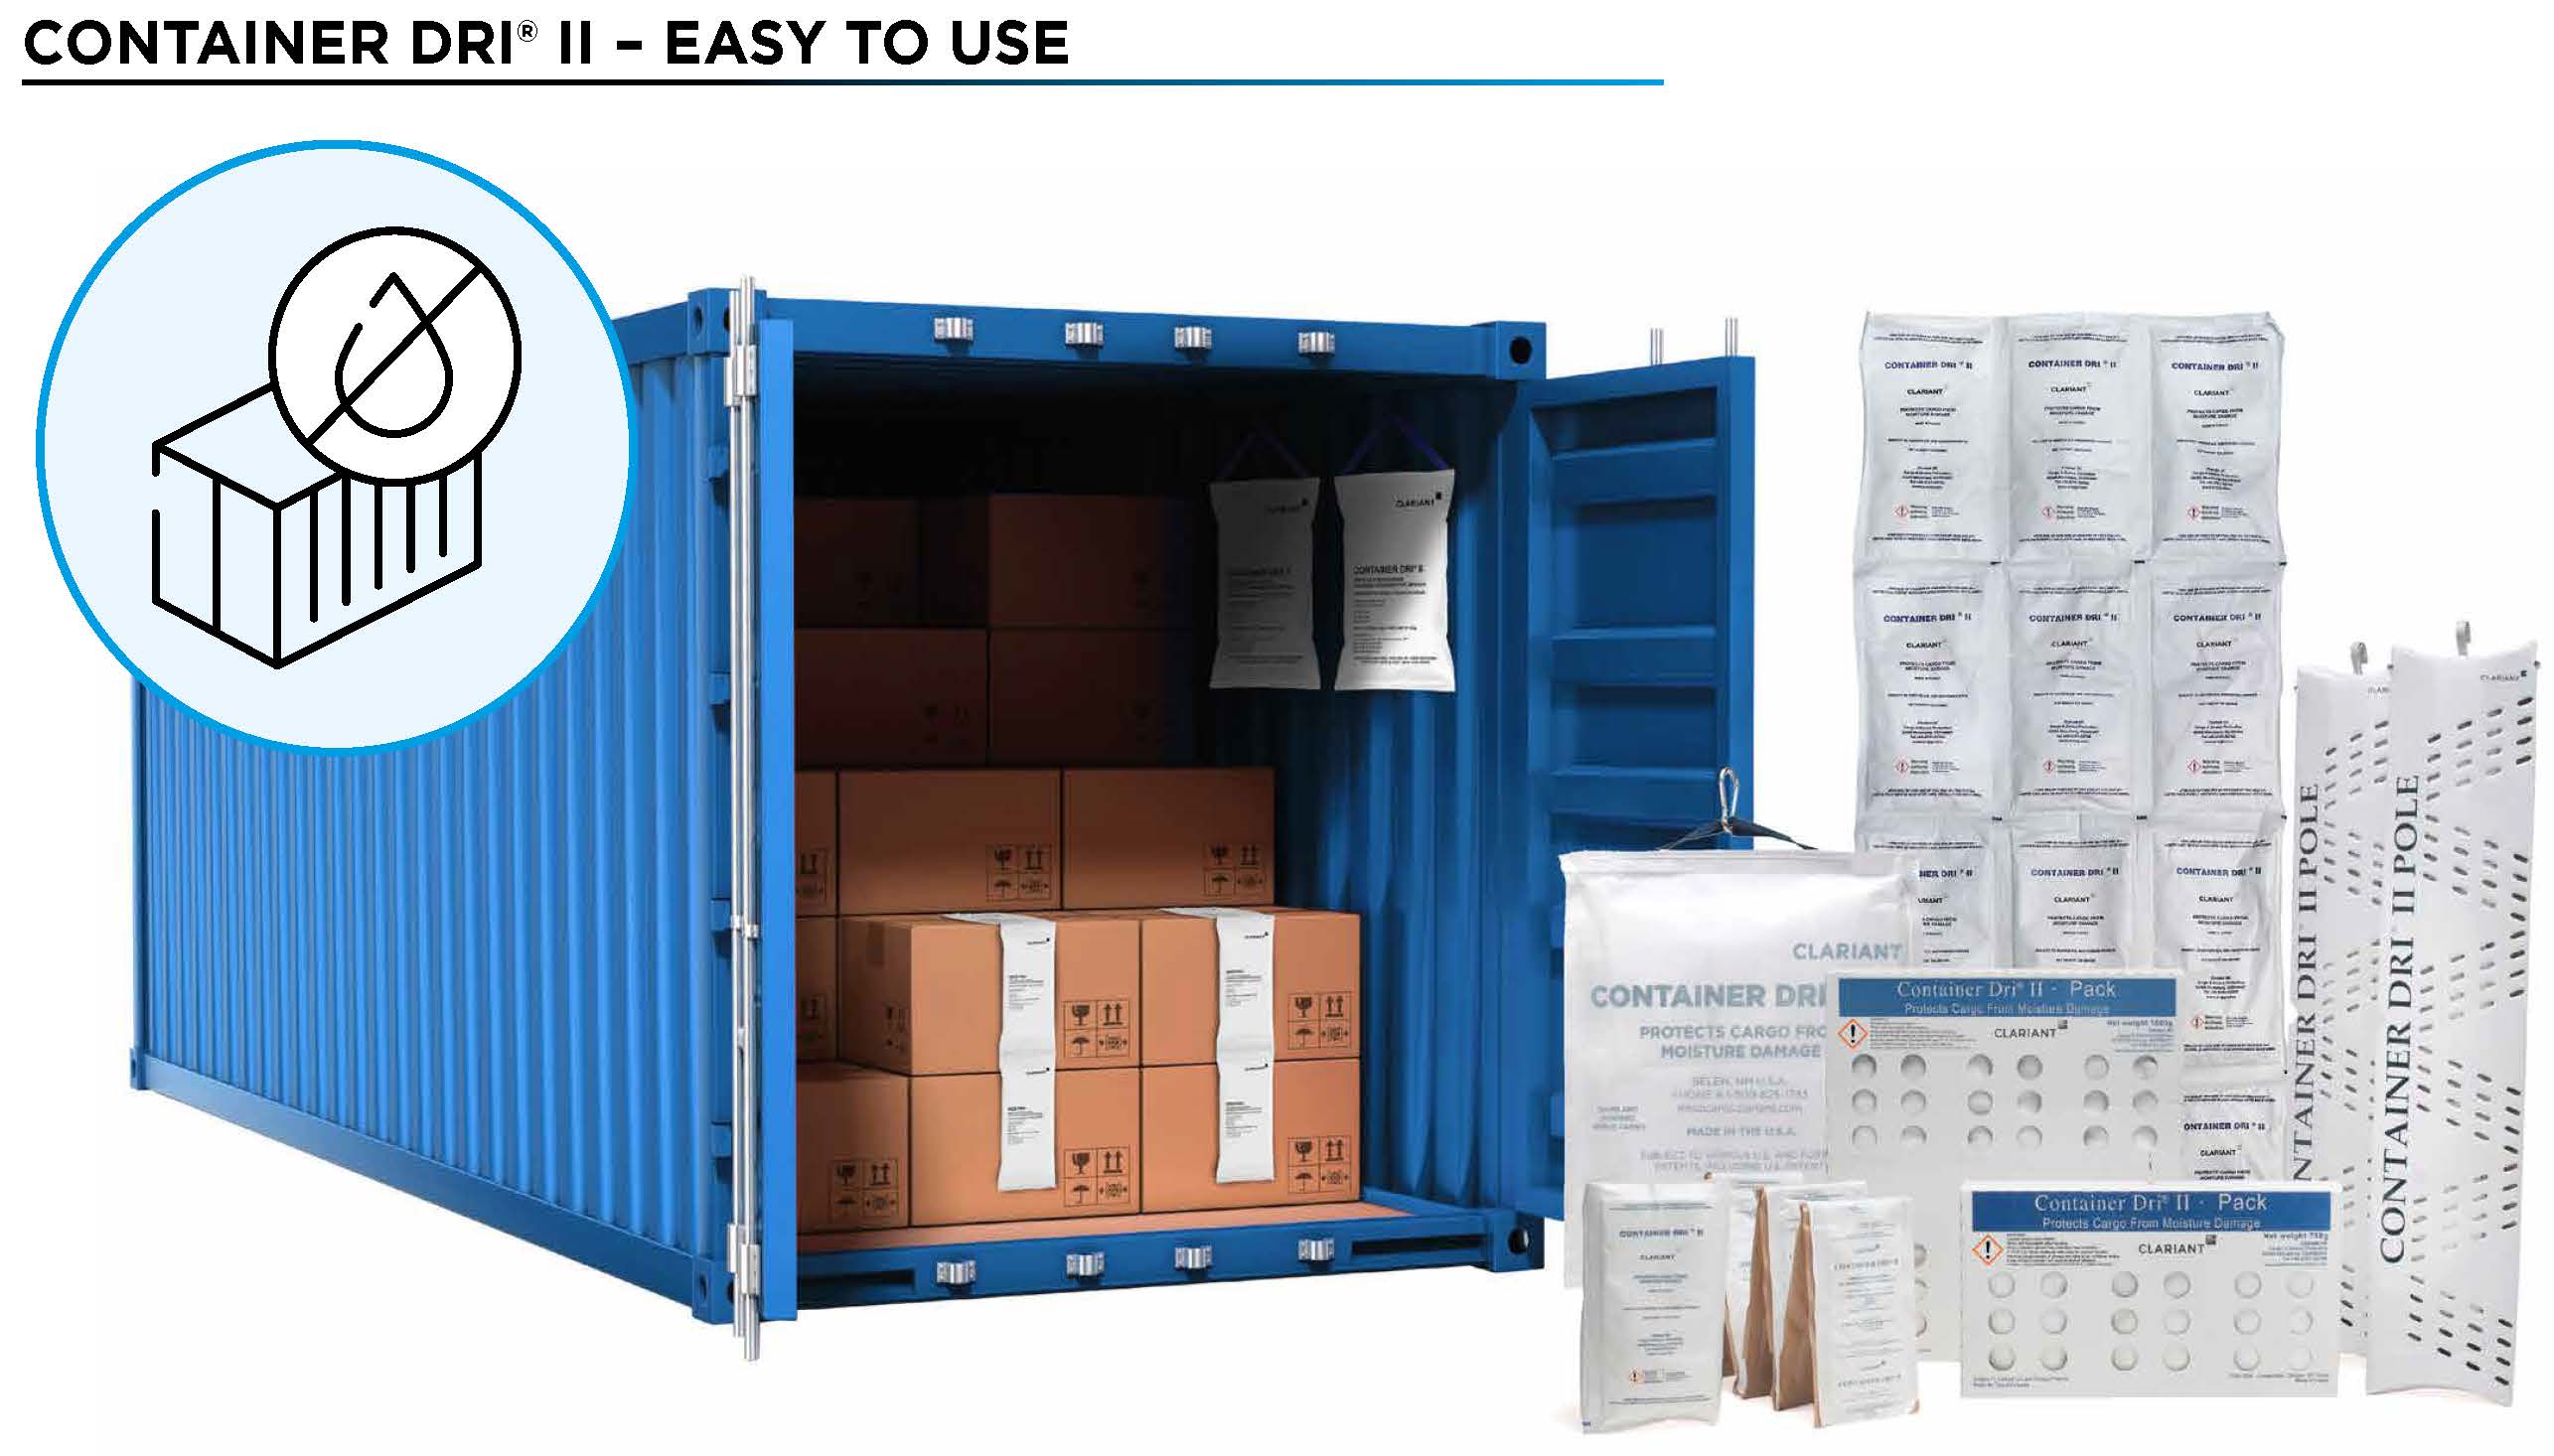 Container Dri II cargo desiccant easy to use